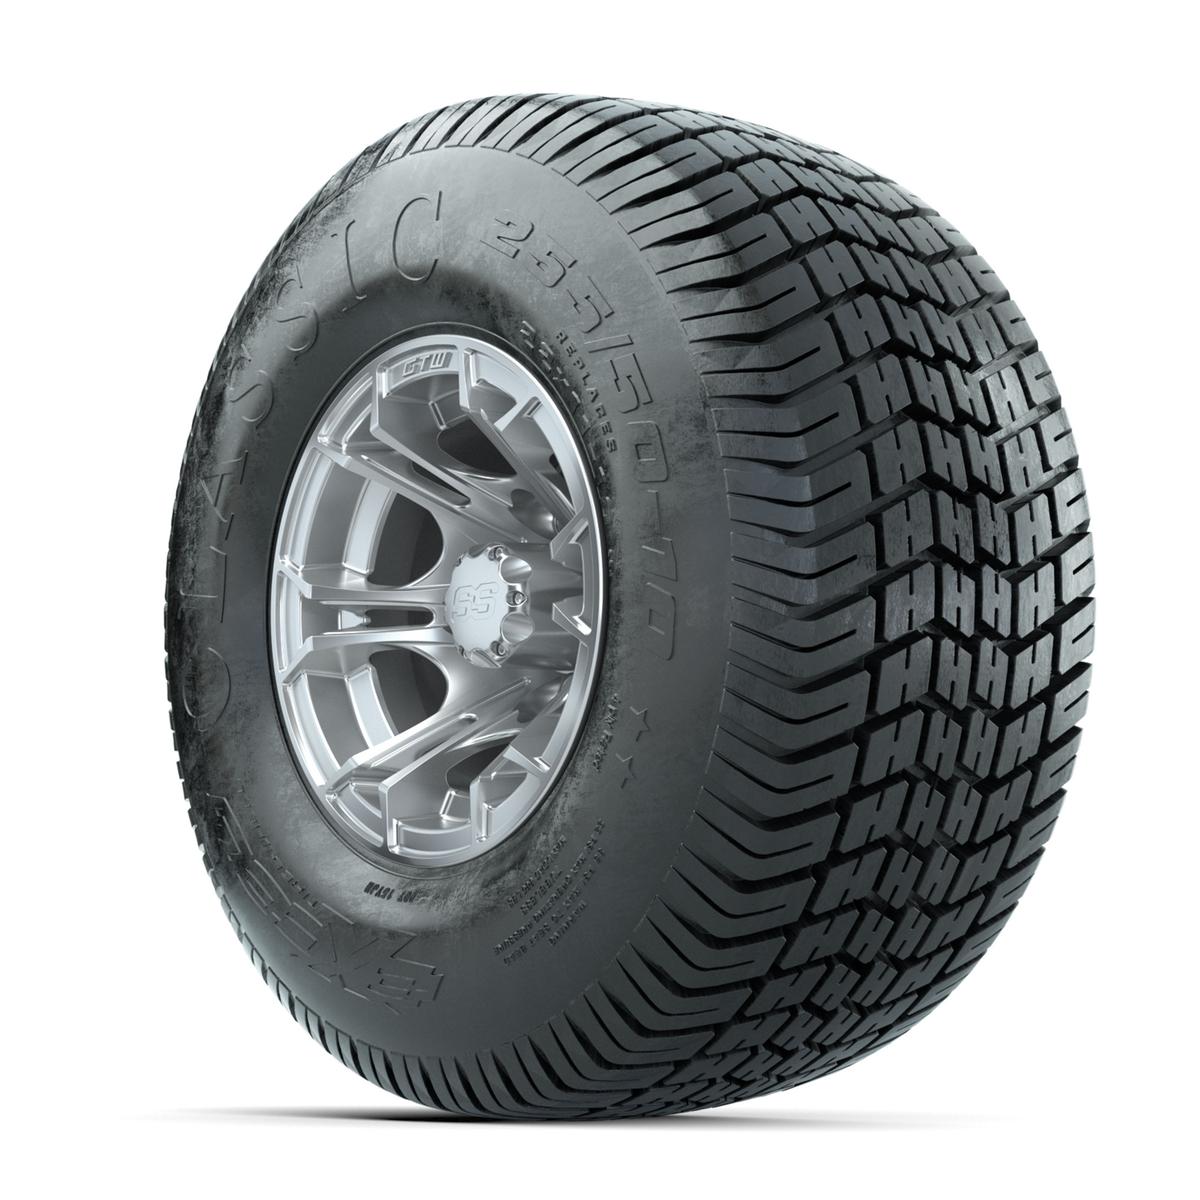 GTW Spyder Silver Brush 10 in Wheels with 22x11-10 Excel Classic Street Tires – Full Set